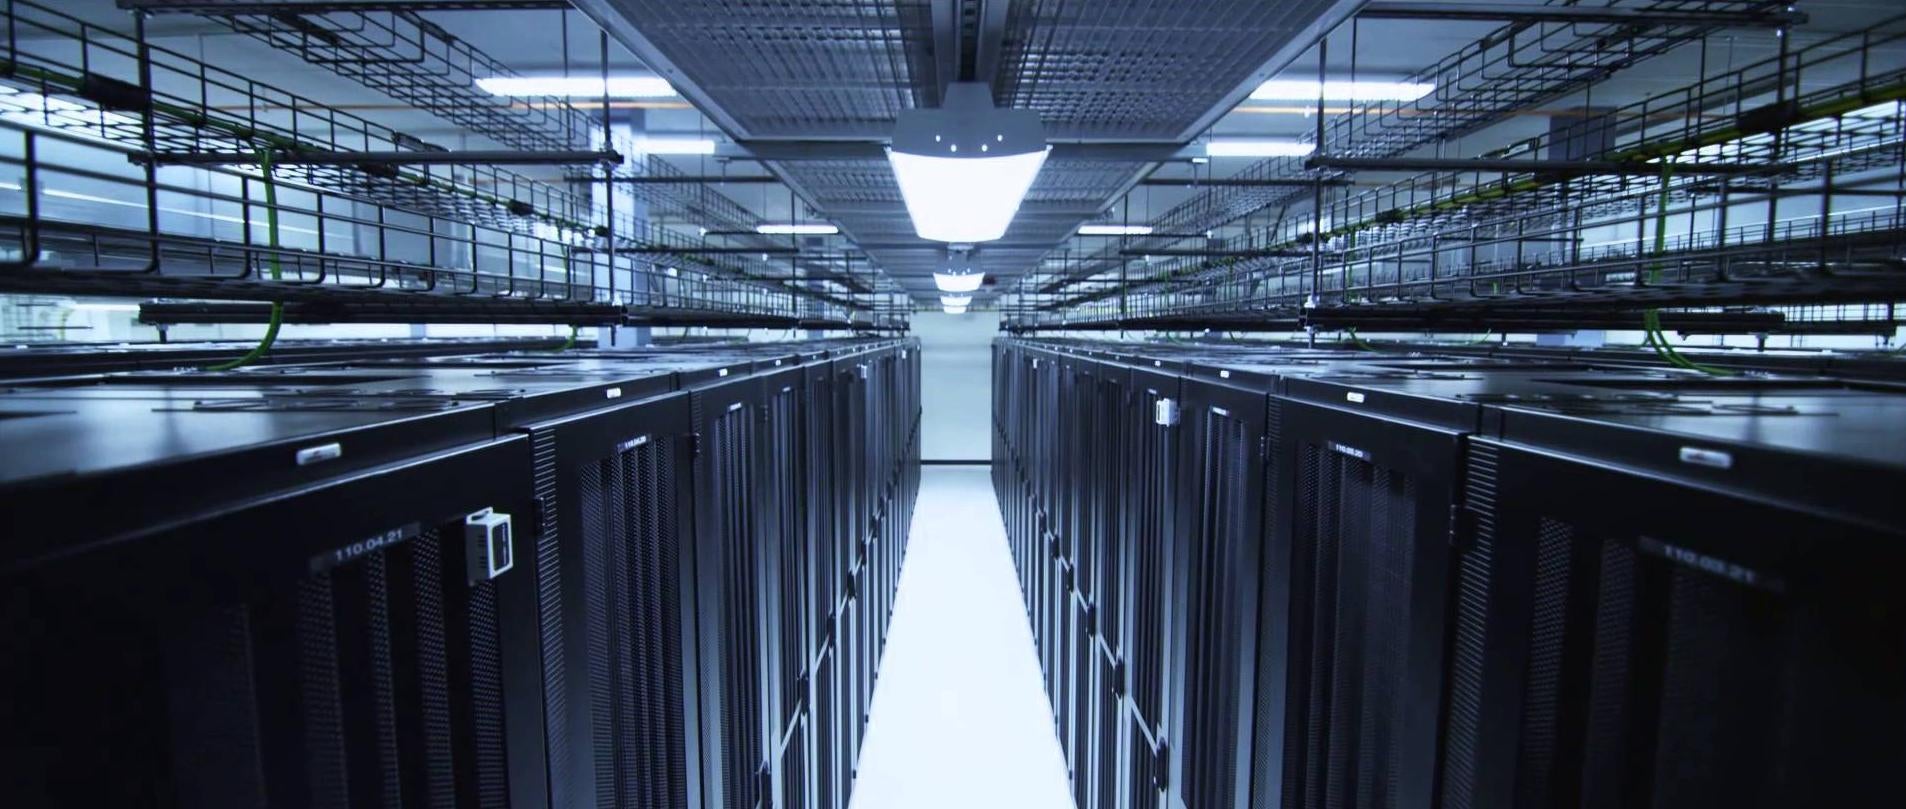 Open, available & interoperable: How open source is transforming the data centre industry